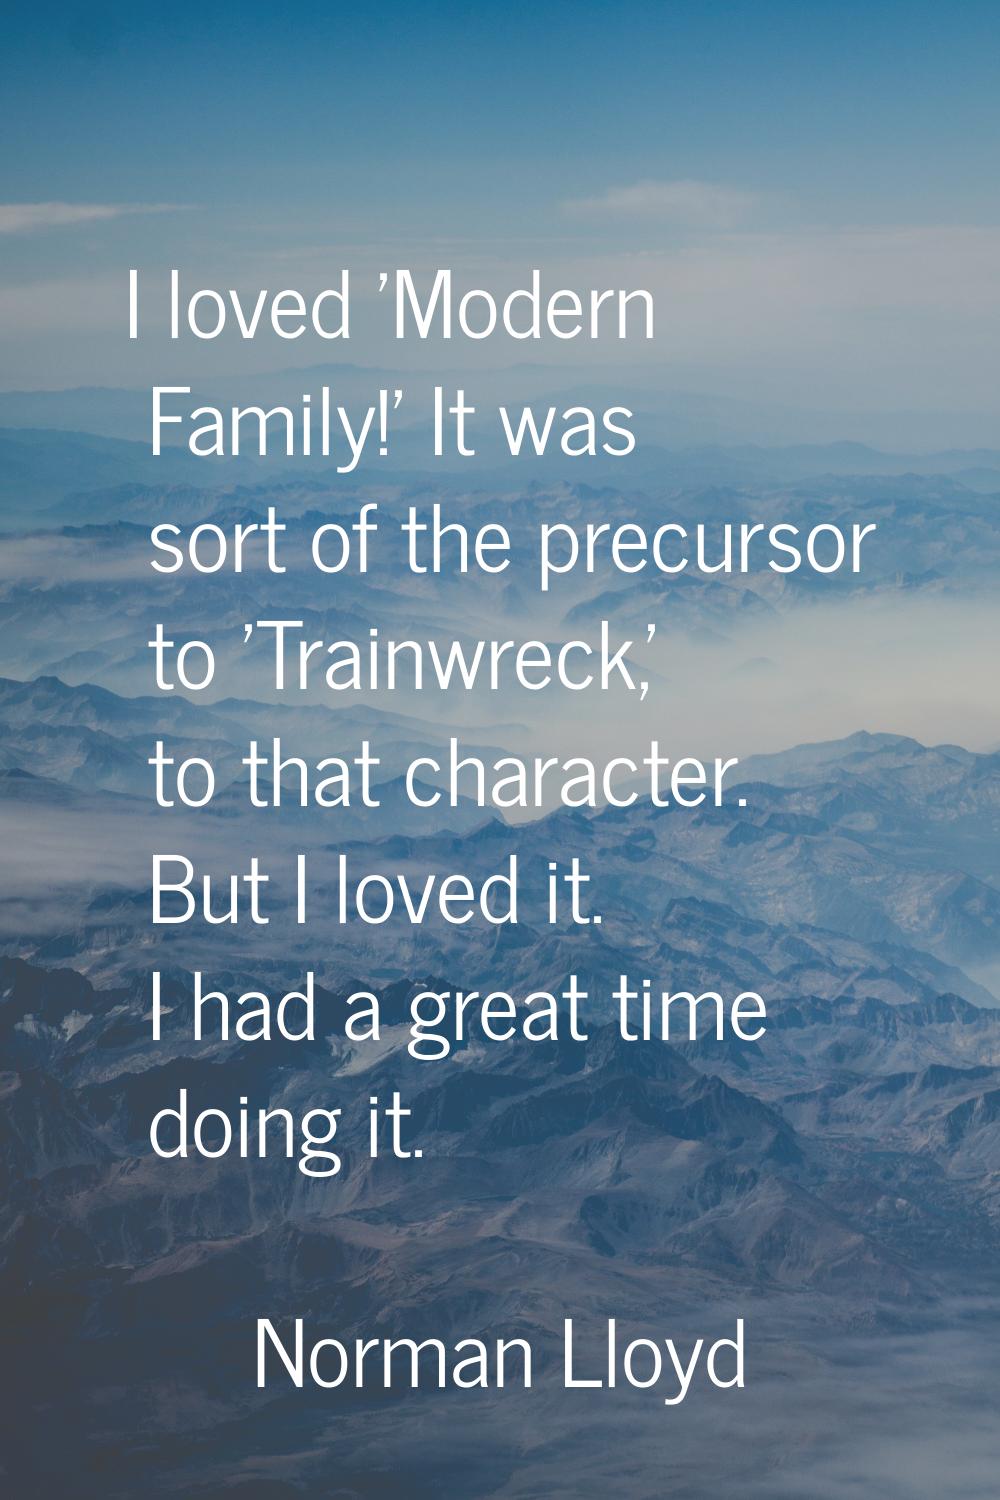 I loved 'Modern Family!' It was sort of the precursor to 'Trainwreck,' to that character. But I lov